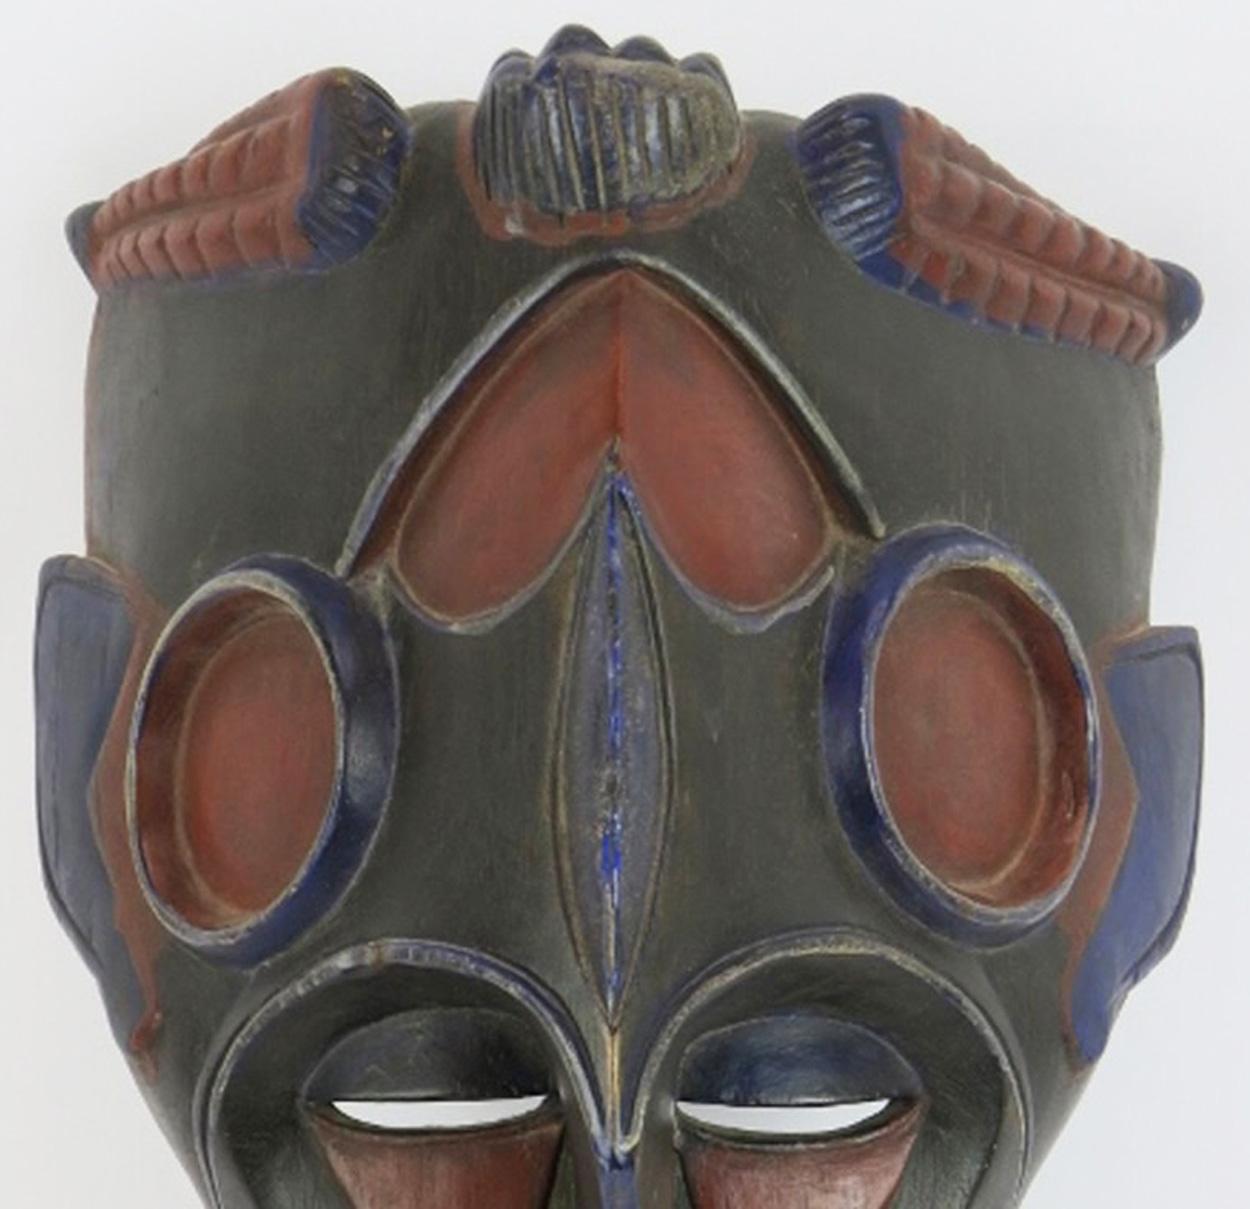 A highly decorative carved wood West African tribal mask decorated in blue and red polychrome colours on a black ground.

In very good condition with only light wear commensurate with age.
